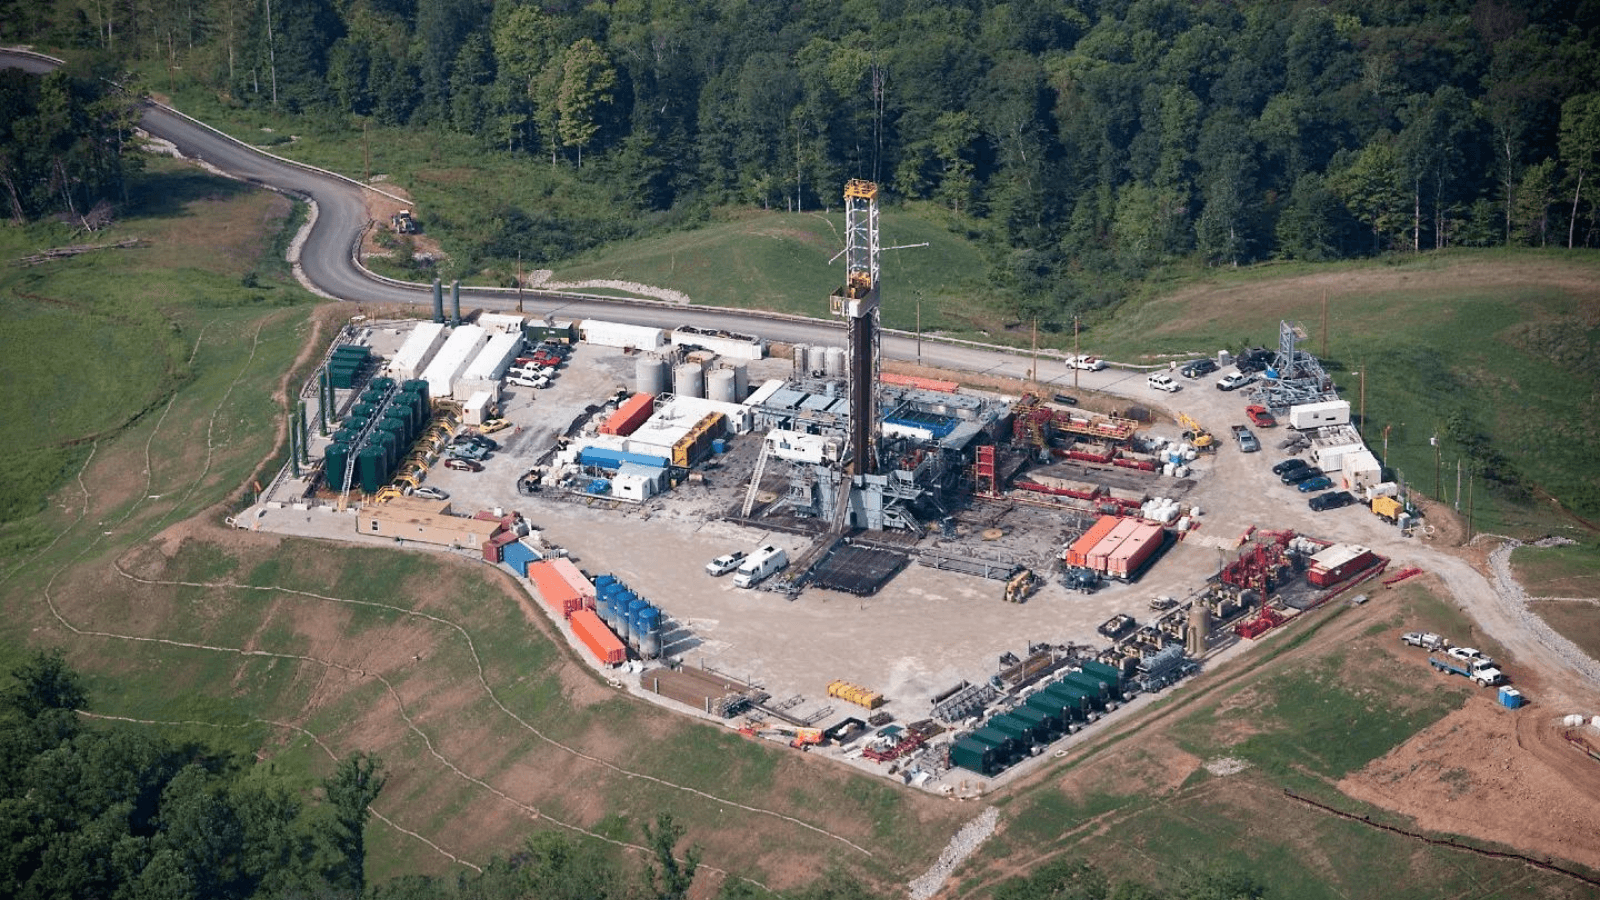 oil and gas well operation that releases methane pollution